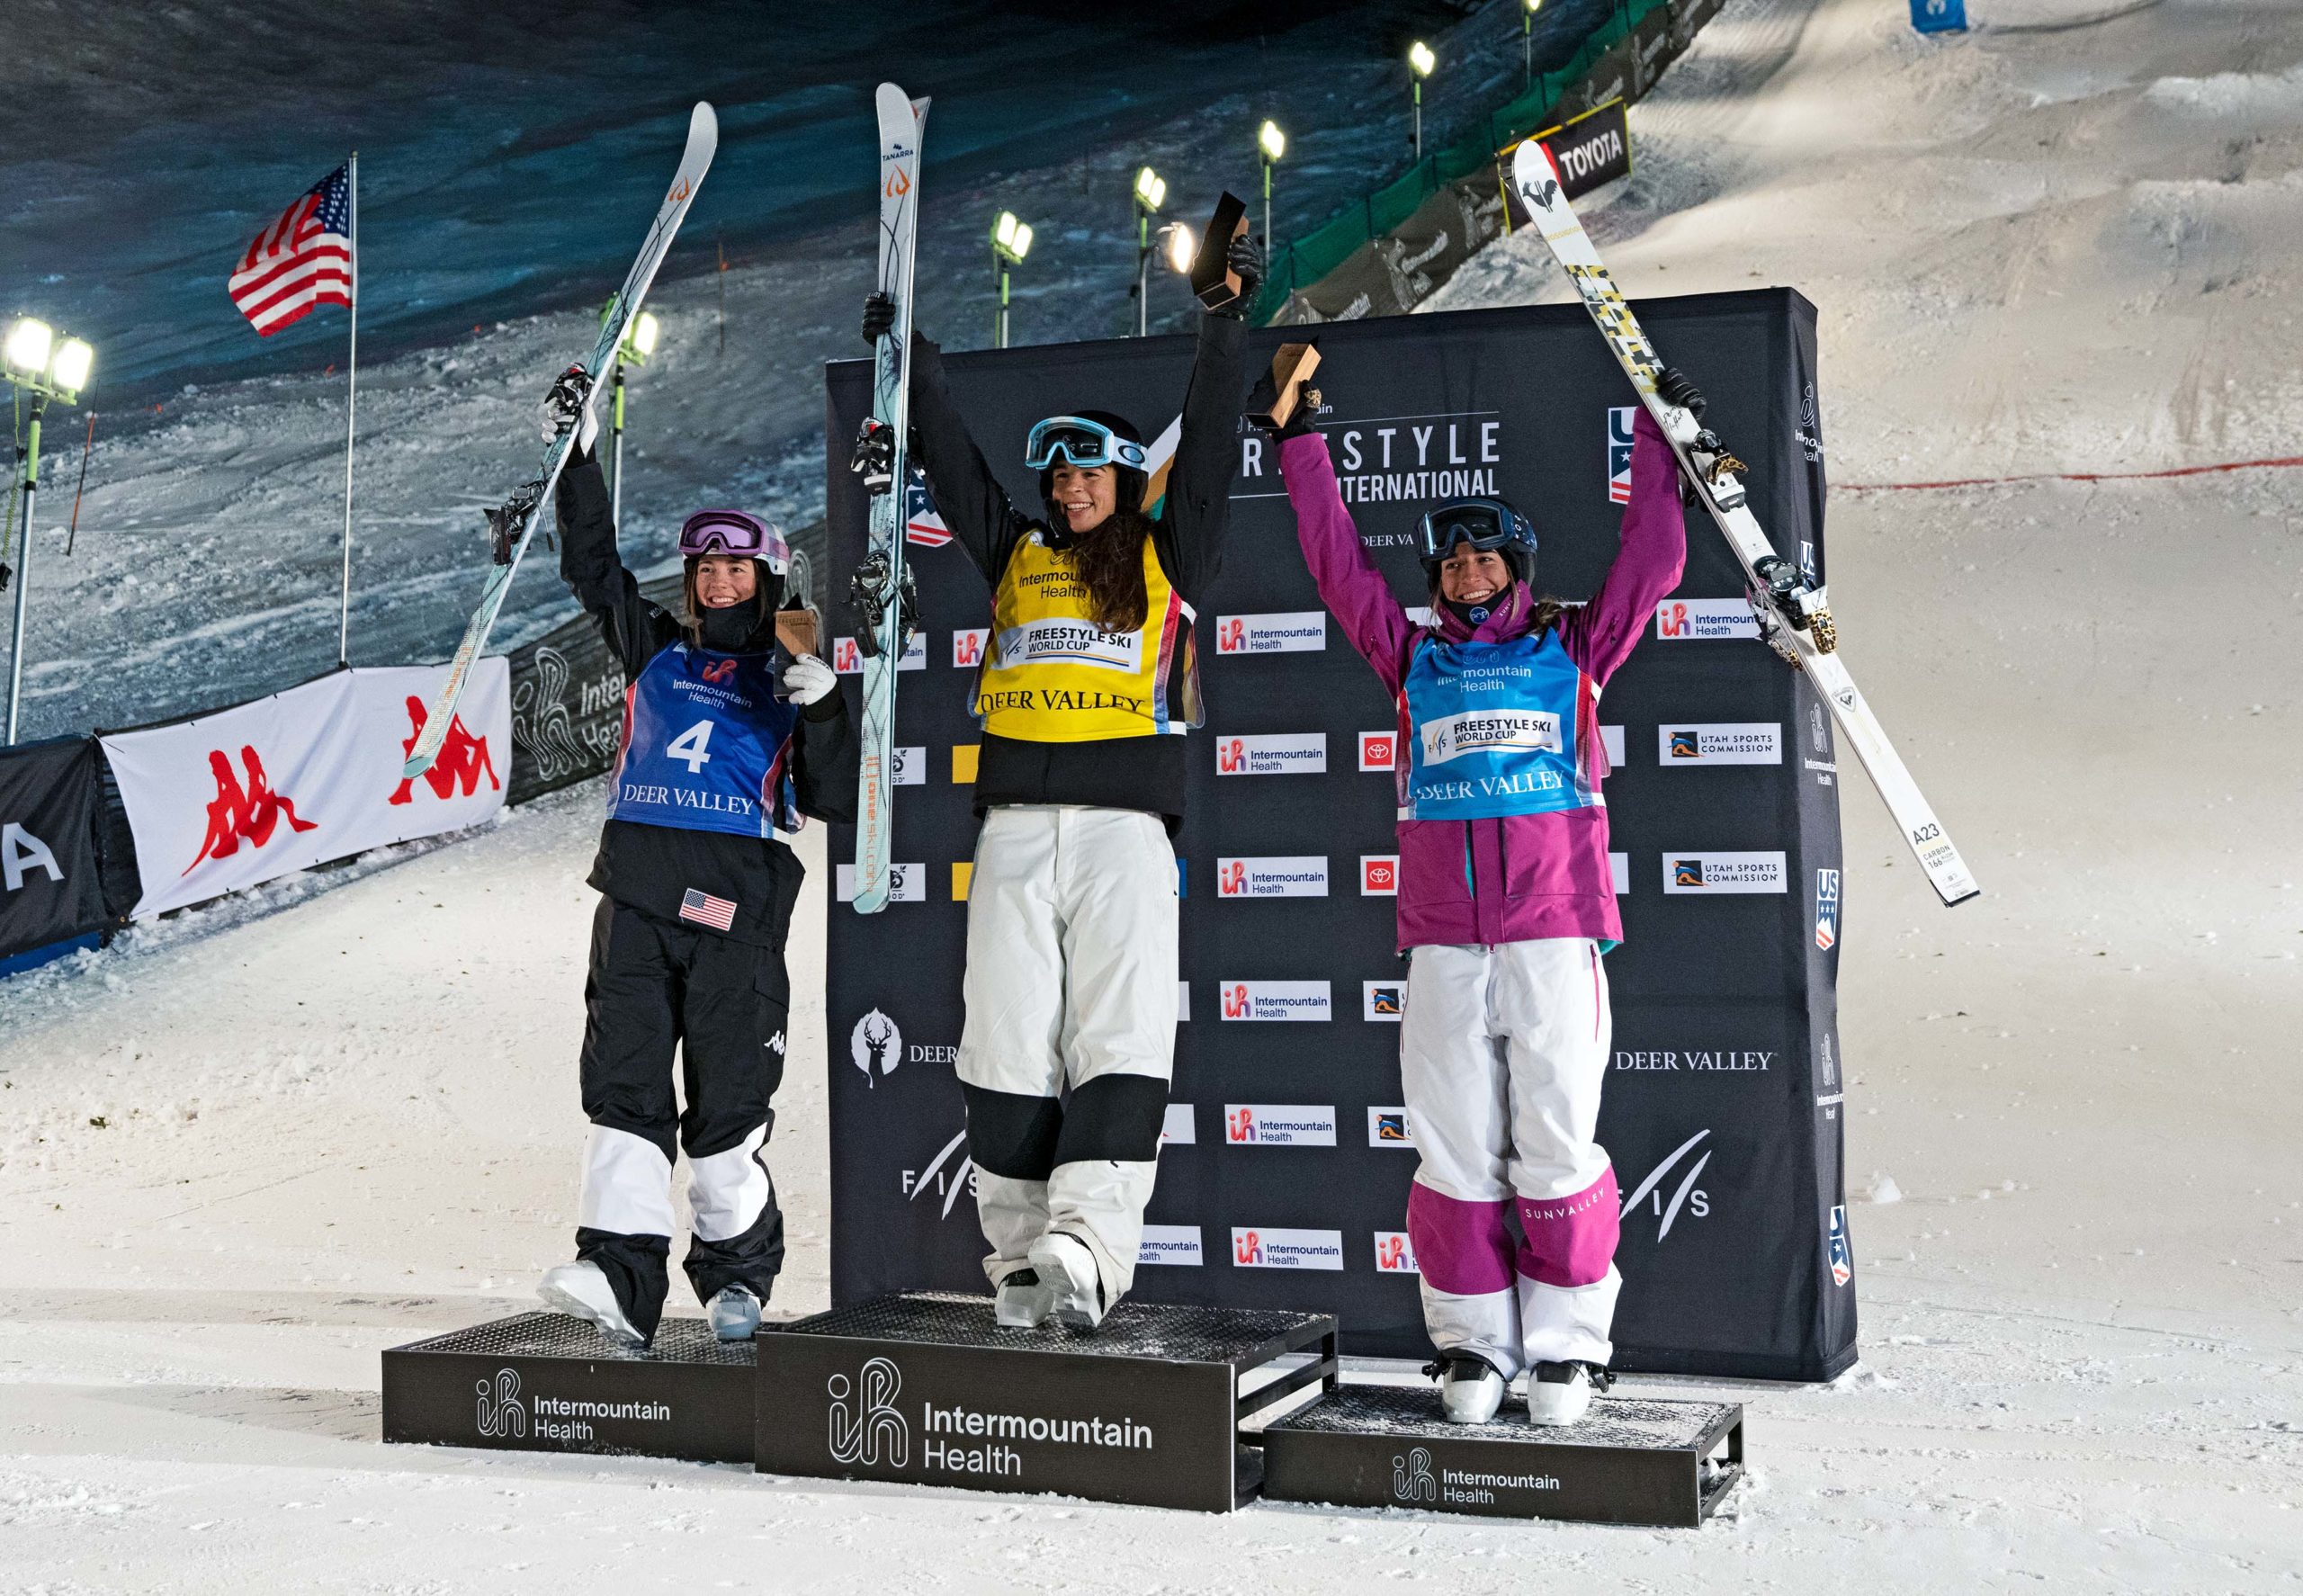 Podium shot showing the top three women's moguls competitors. Pictured from Left to Right: 2nd Place Jaelin Kauf, 1st place Jakara Anthony and 3rd place Perrine Laffont.